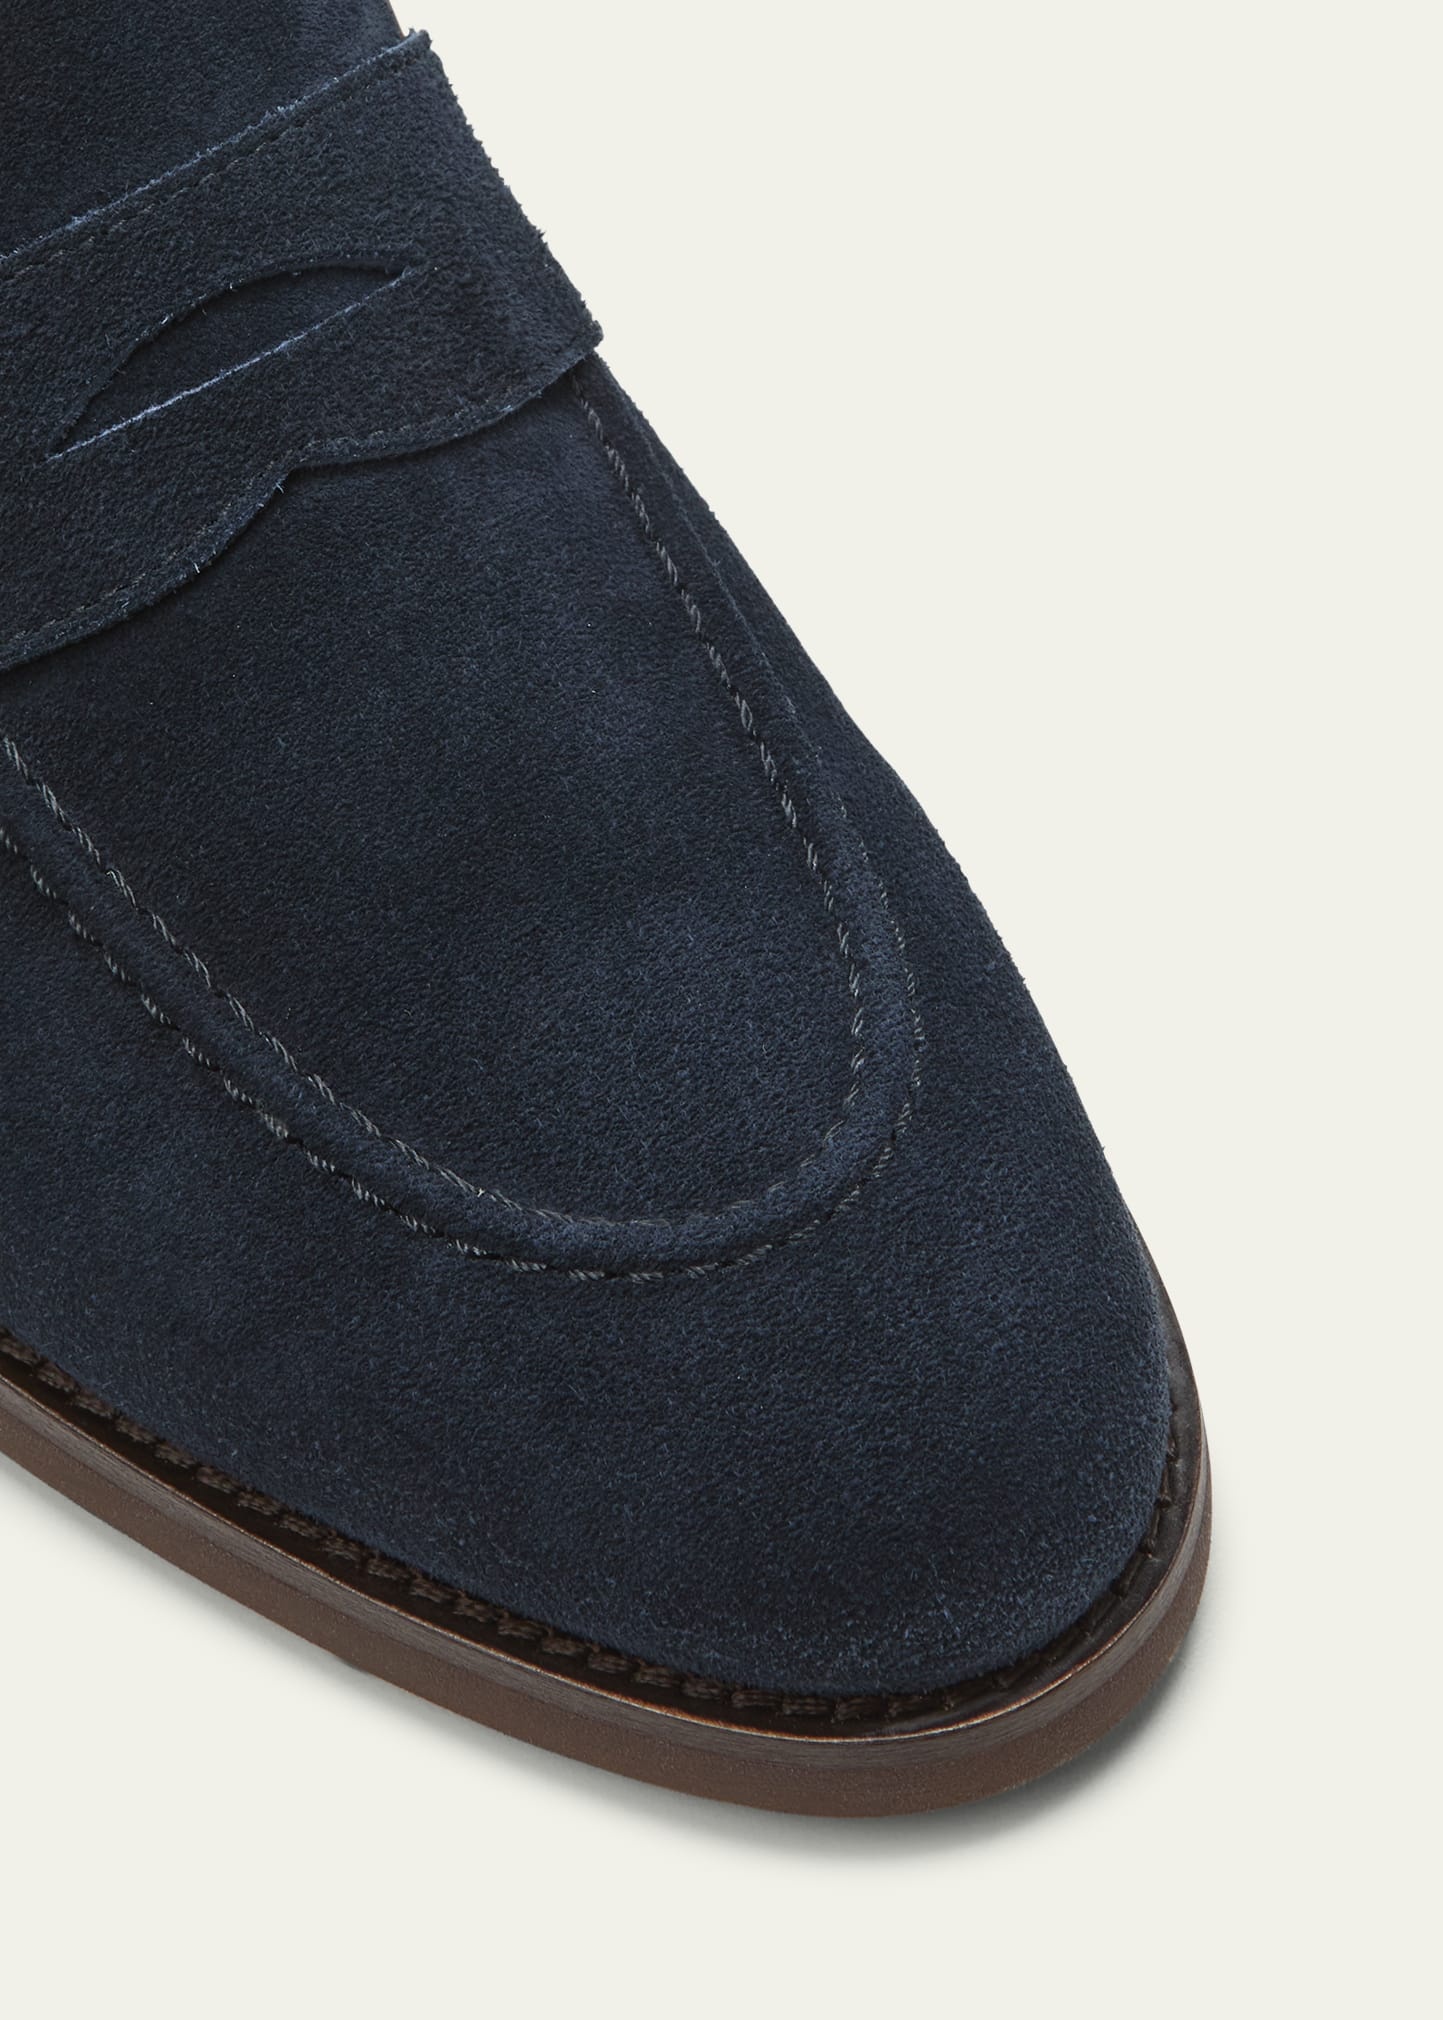 Men's Suede Penny Loafers - 3